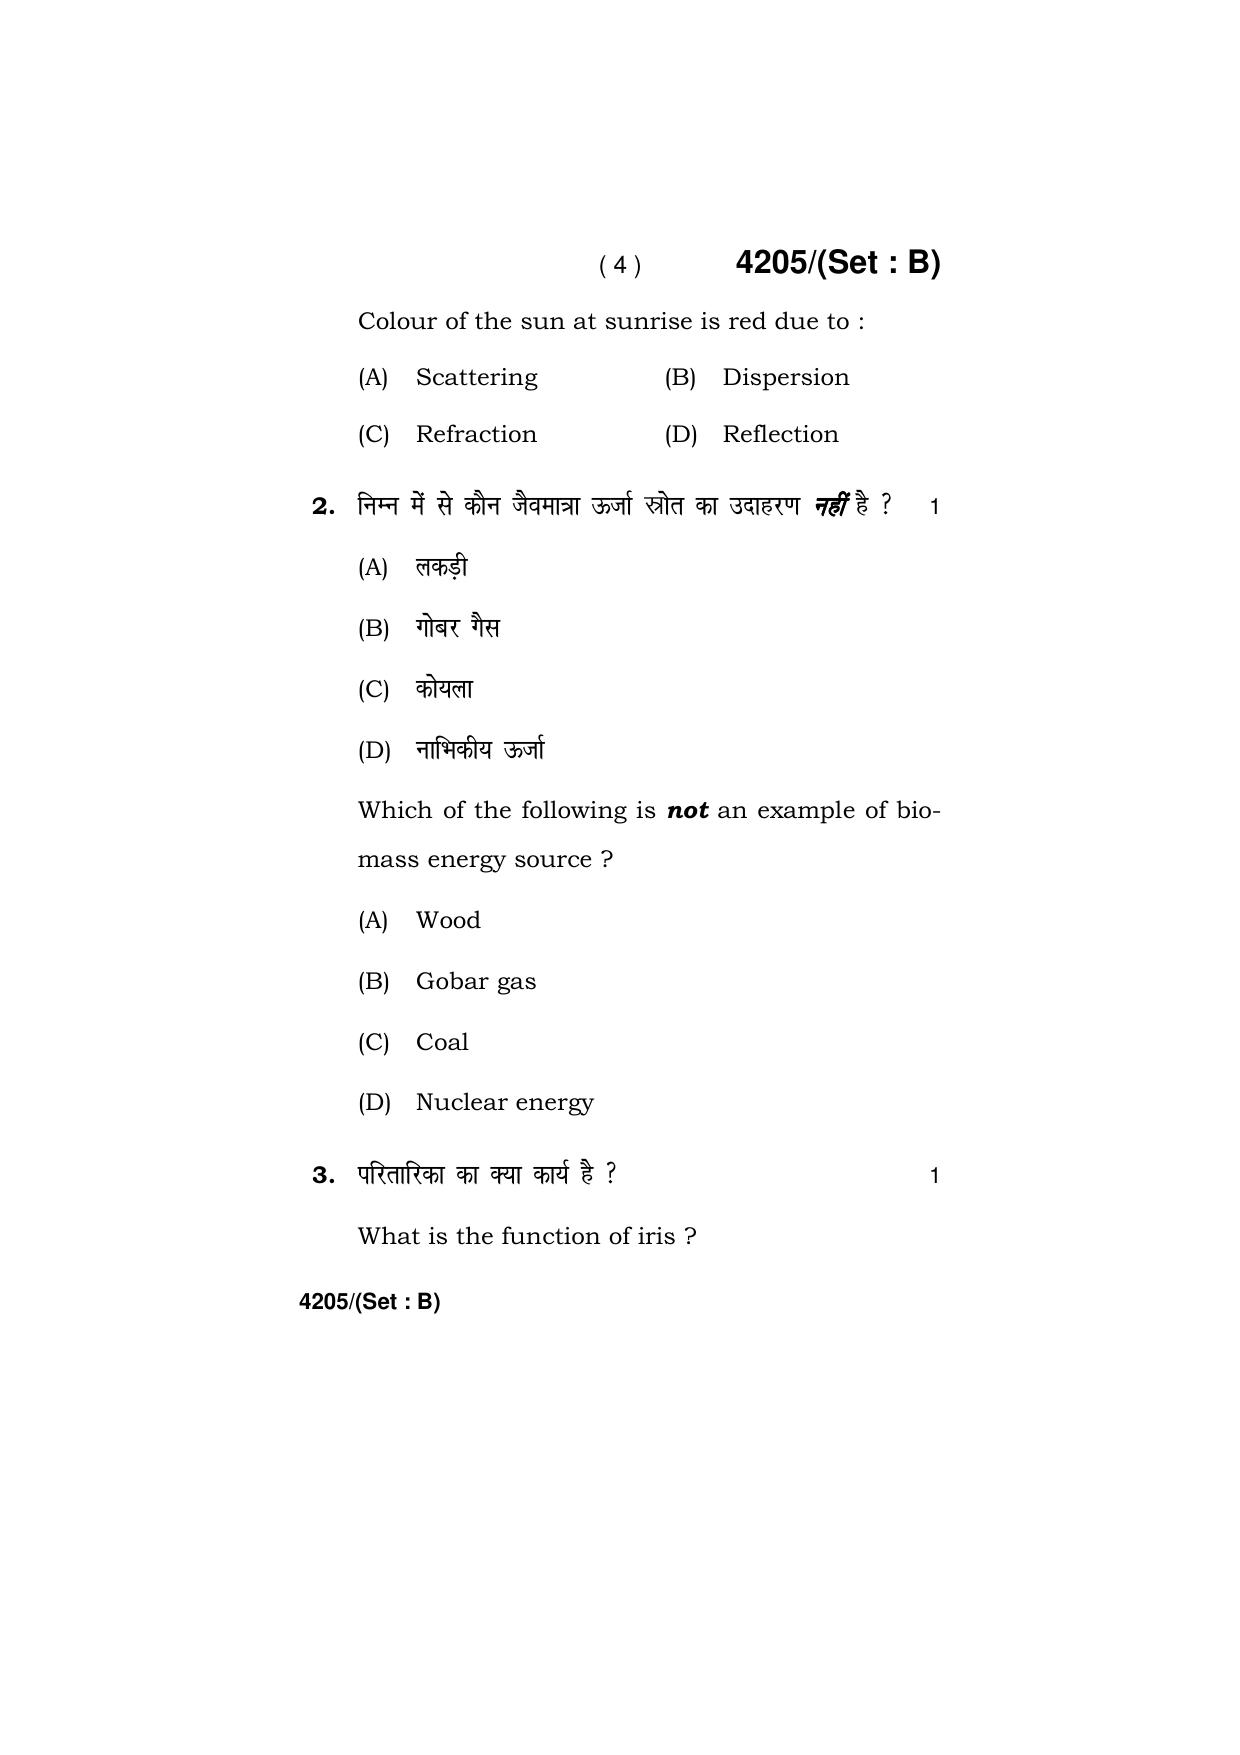 Haryana Board HBSE Class 10 Science (All Set) 2019 Question Paper - Page 20